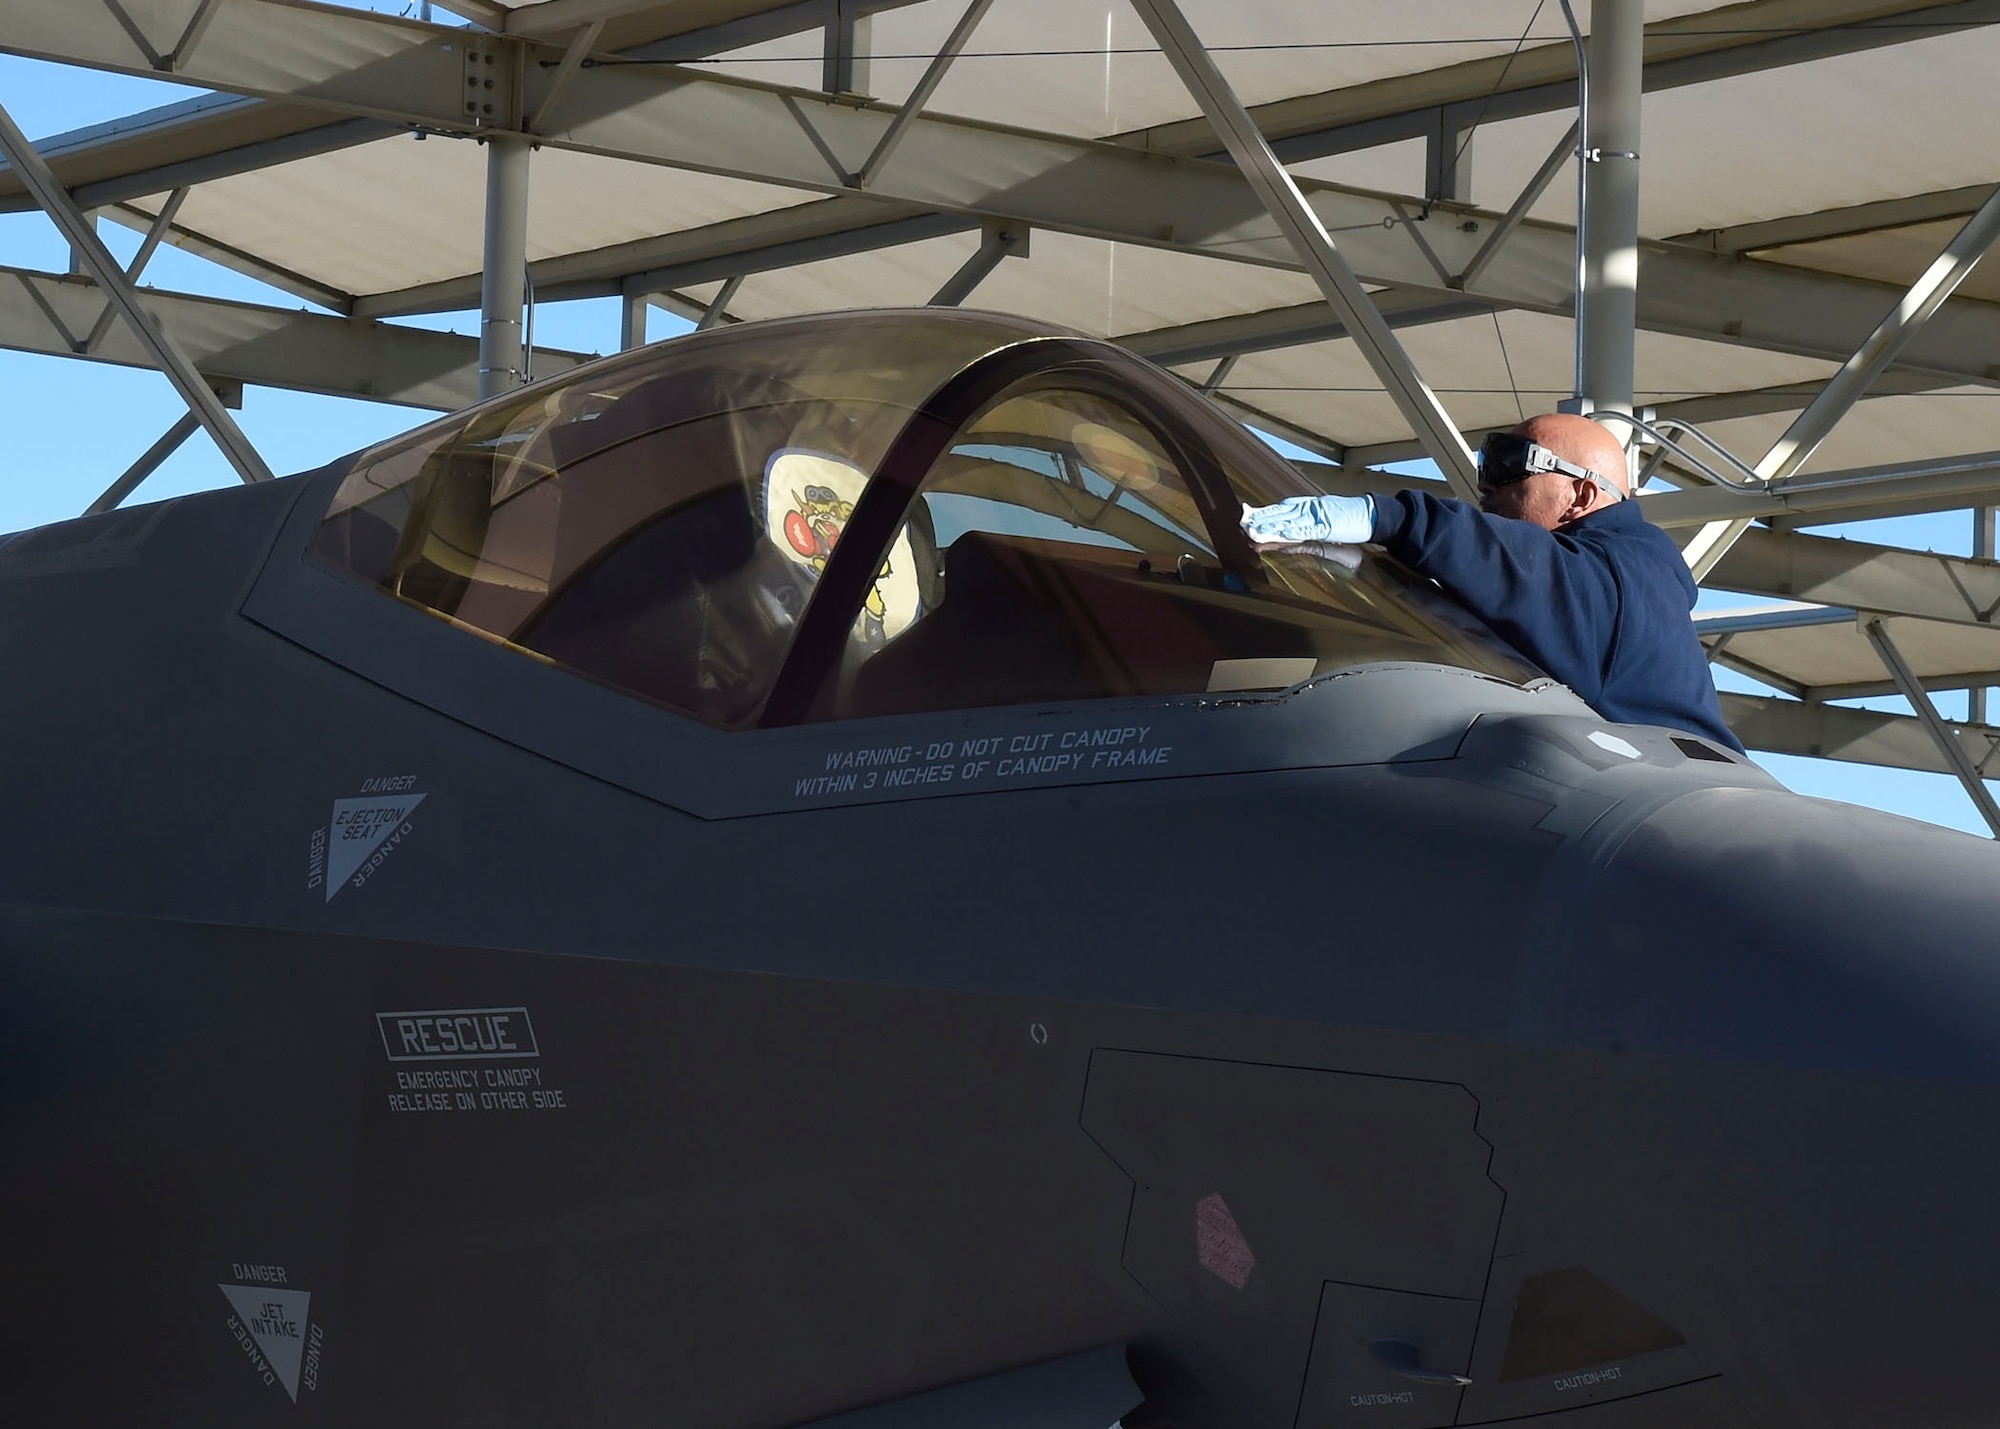 Chad Thomson, 62nd Aircraft Maintenance Unit Lockheed Martin crew chief, stands by to marshal an F-35 Lightning II Jan. 24, 2017, at Luke Air Force Base, Ariz. The 62nd AMU is in the process of integrating Airmen into its maintenance operations. (U.S. Air Force photo by Senior Airman James Hensley)